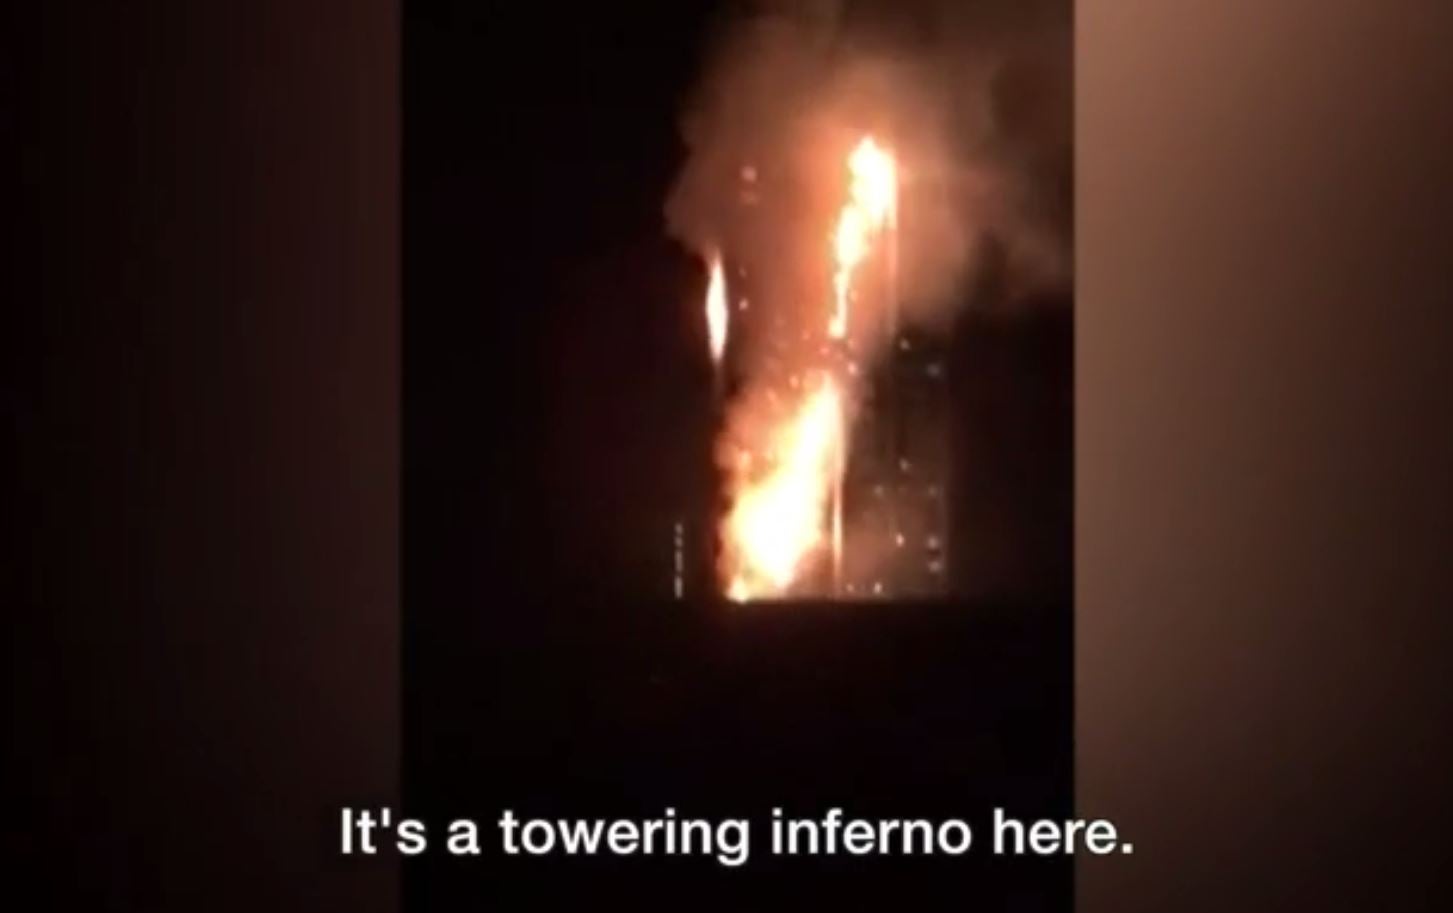 Grenfell disaster: BBC Panorama reveals ministers were repeatedly warned about tower block fire safety